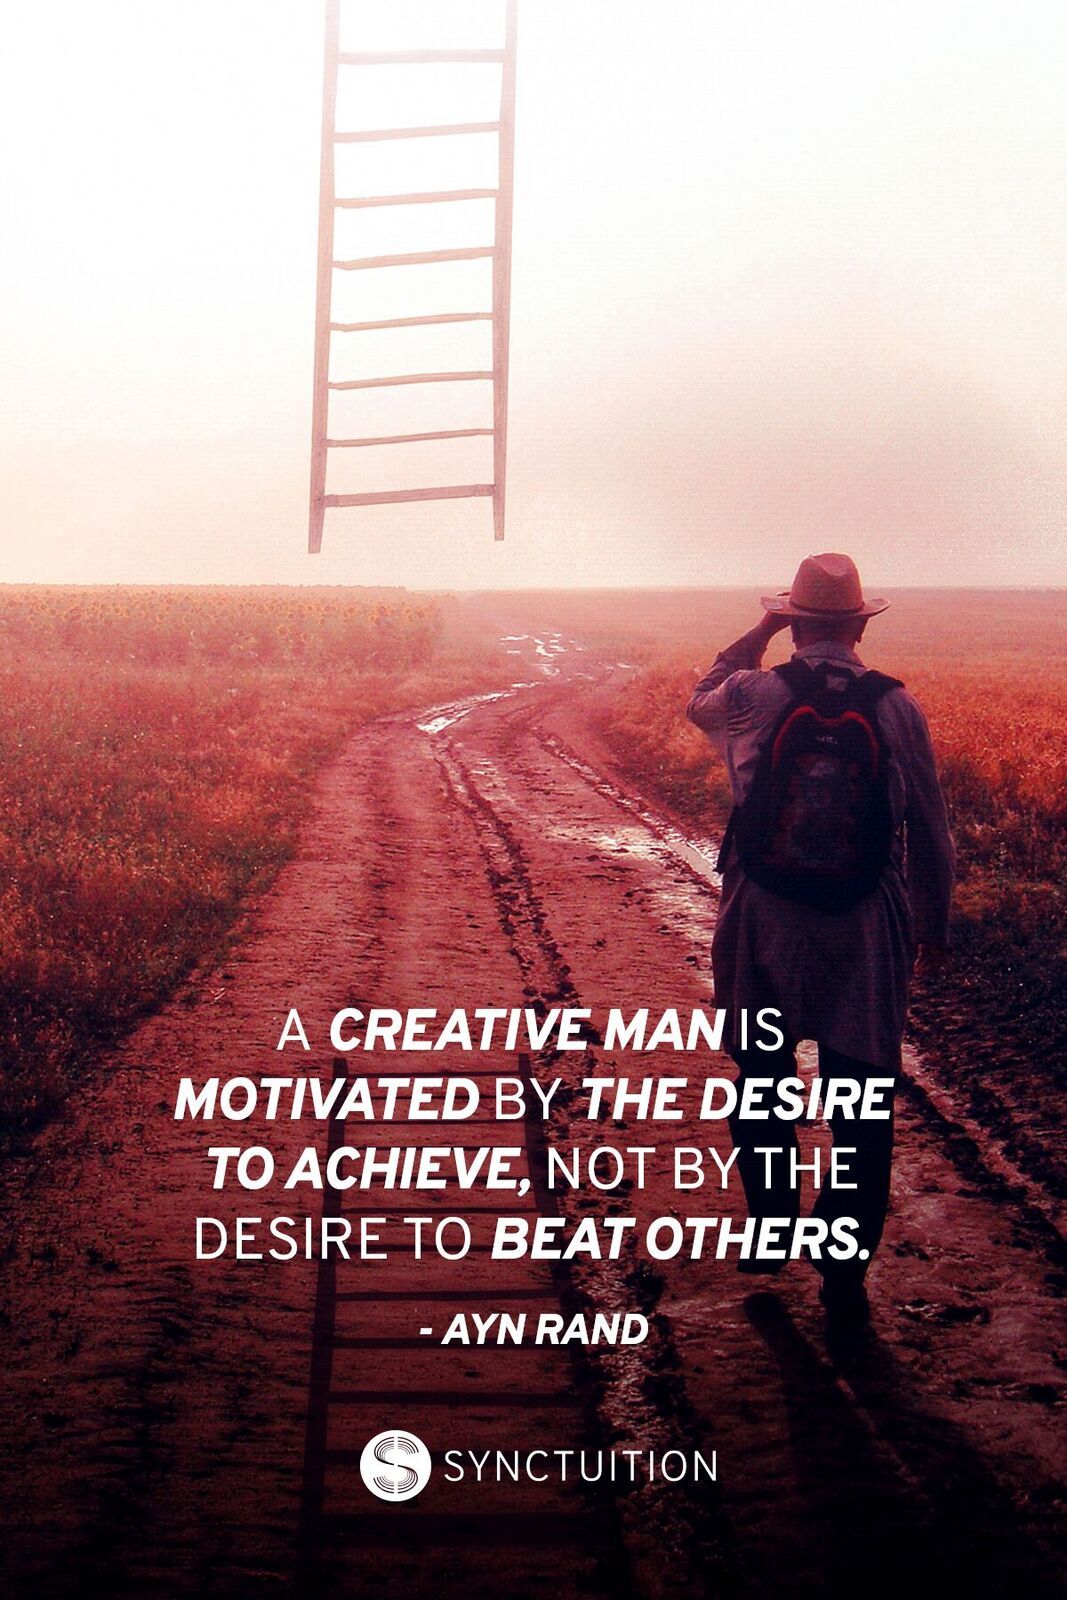 Quote on creativity and achievement by Ayn Rand